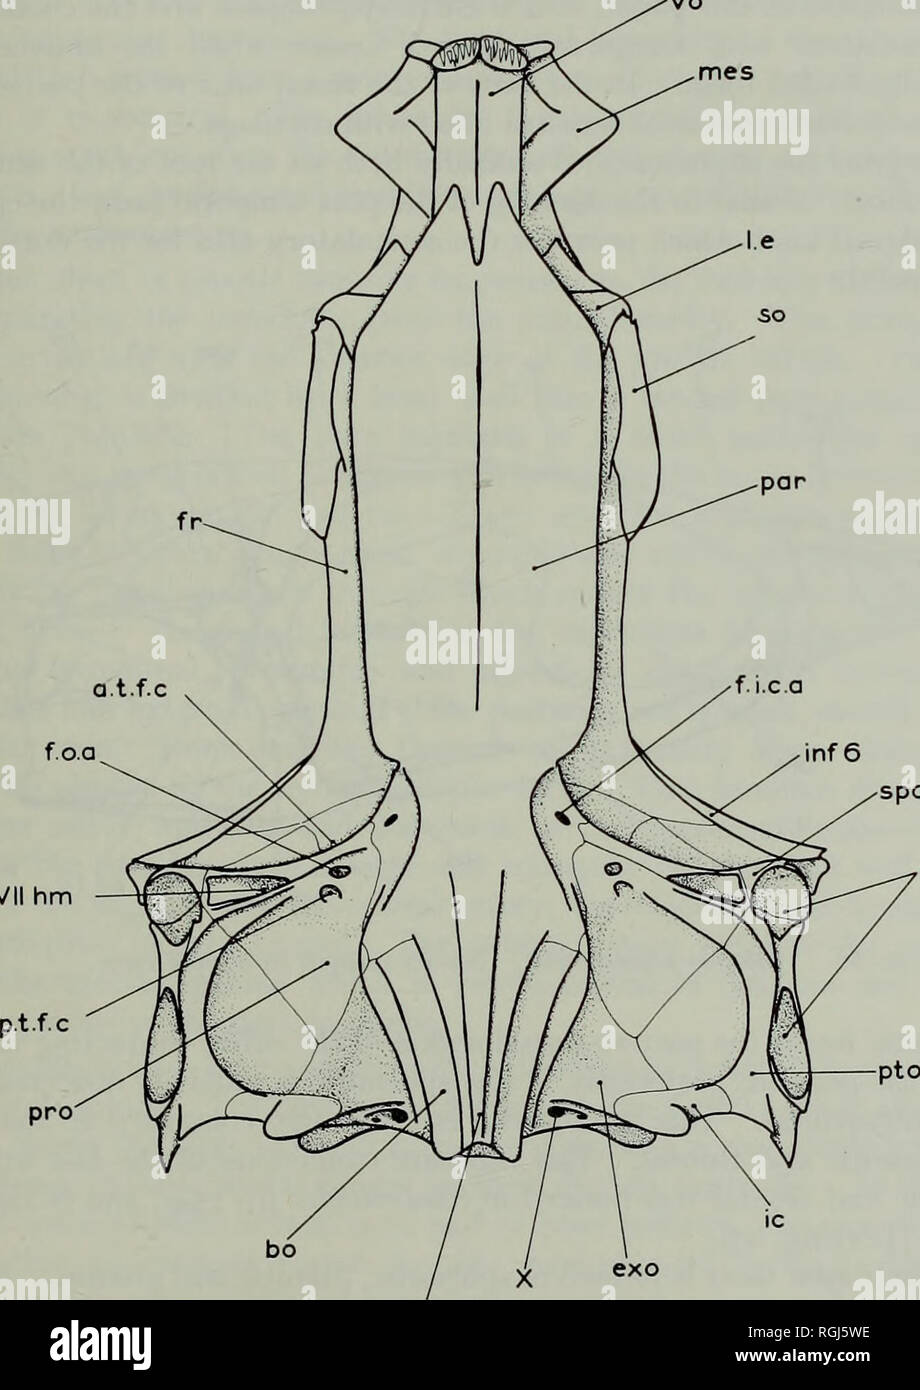 . Bulletin of the British Museum (Natural History) Geology Supplement. ESPECIALLY MYCTOPHOIDS 207 canal also transmitted the preopercular sensory canal. Laterally the pterotic is deeply excavated as the dilatator fossa. The anterior part of this fossa is however formed from a postero-dorsal excavation of the sphenotic, and the suture between the pterotic and sphenotic is visible both above and below the fossa. The post-temporal fossa is large and partially roofed, the roof being composed anteriorly of frontal and posteriorly of parietal and pterotic. The lateral wall and. spo f.hm VII hm par 1 Stock Photo